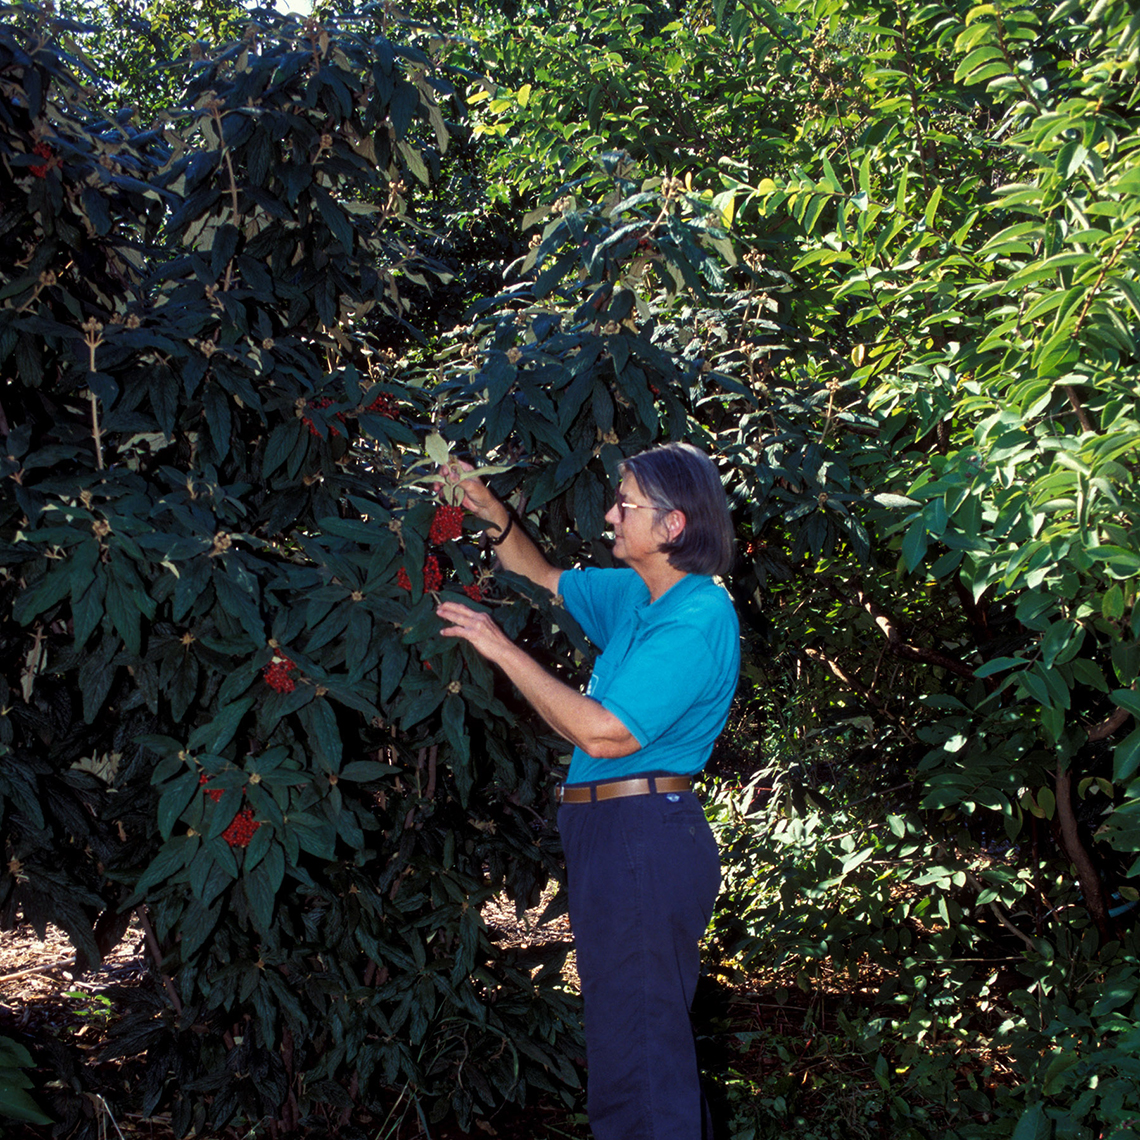 A woman standing next to a very tall specimen of Cree viburnum which has dark green foliage and a heavy crop of red berries